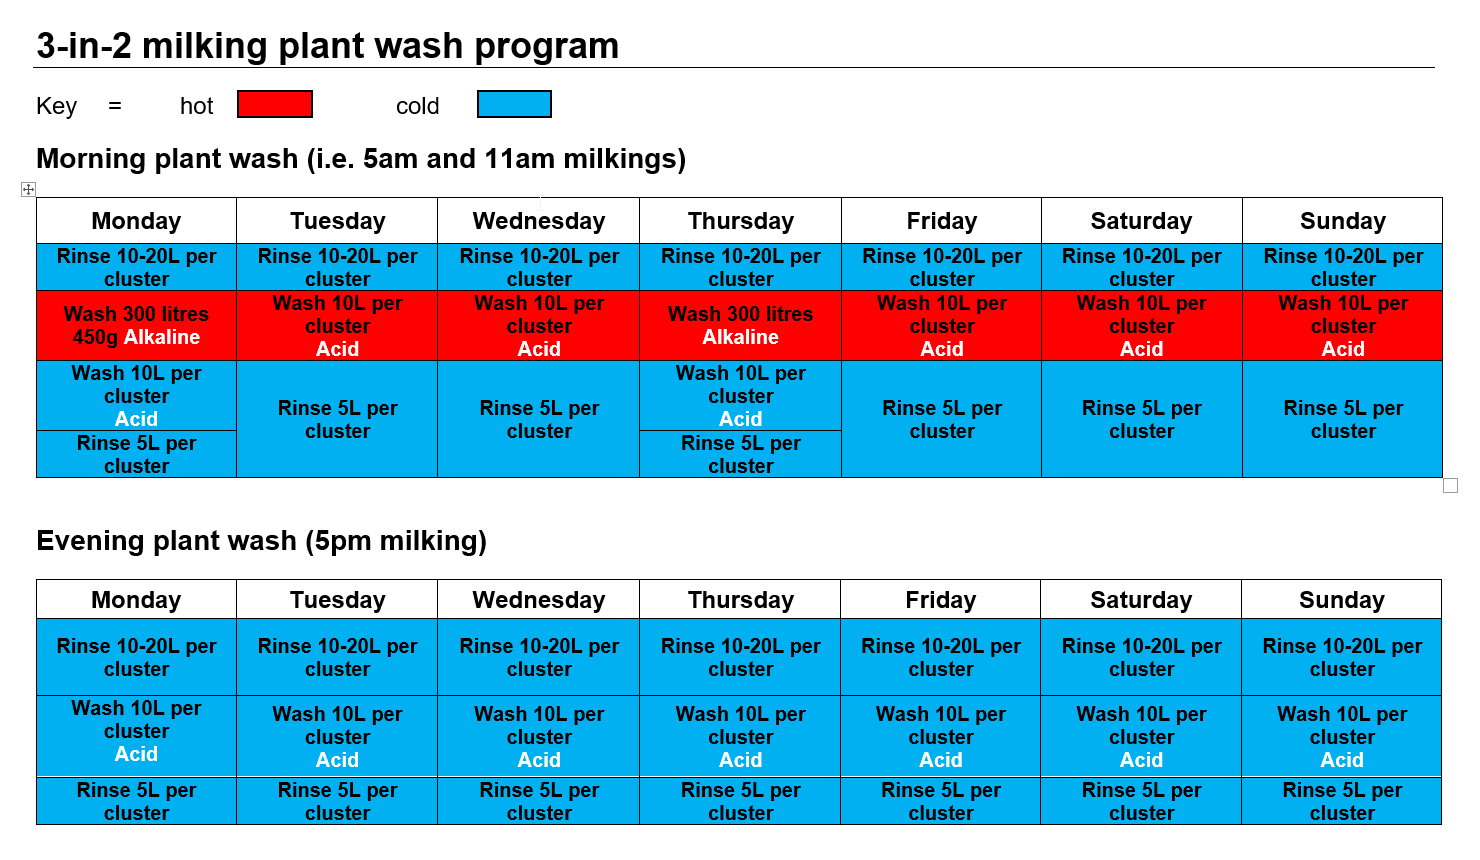 Example 3-in-2 plant wash program